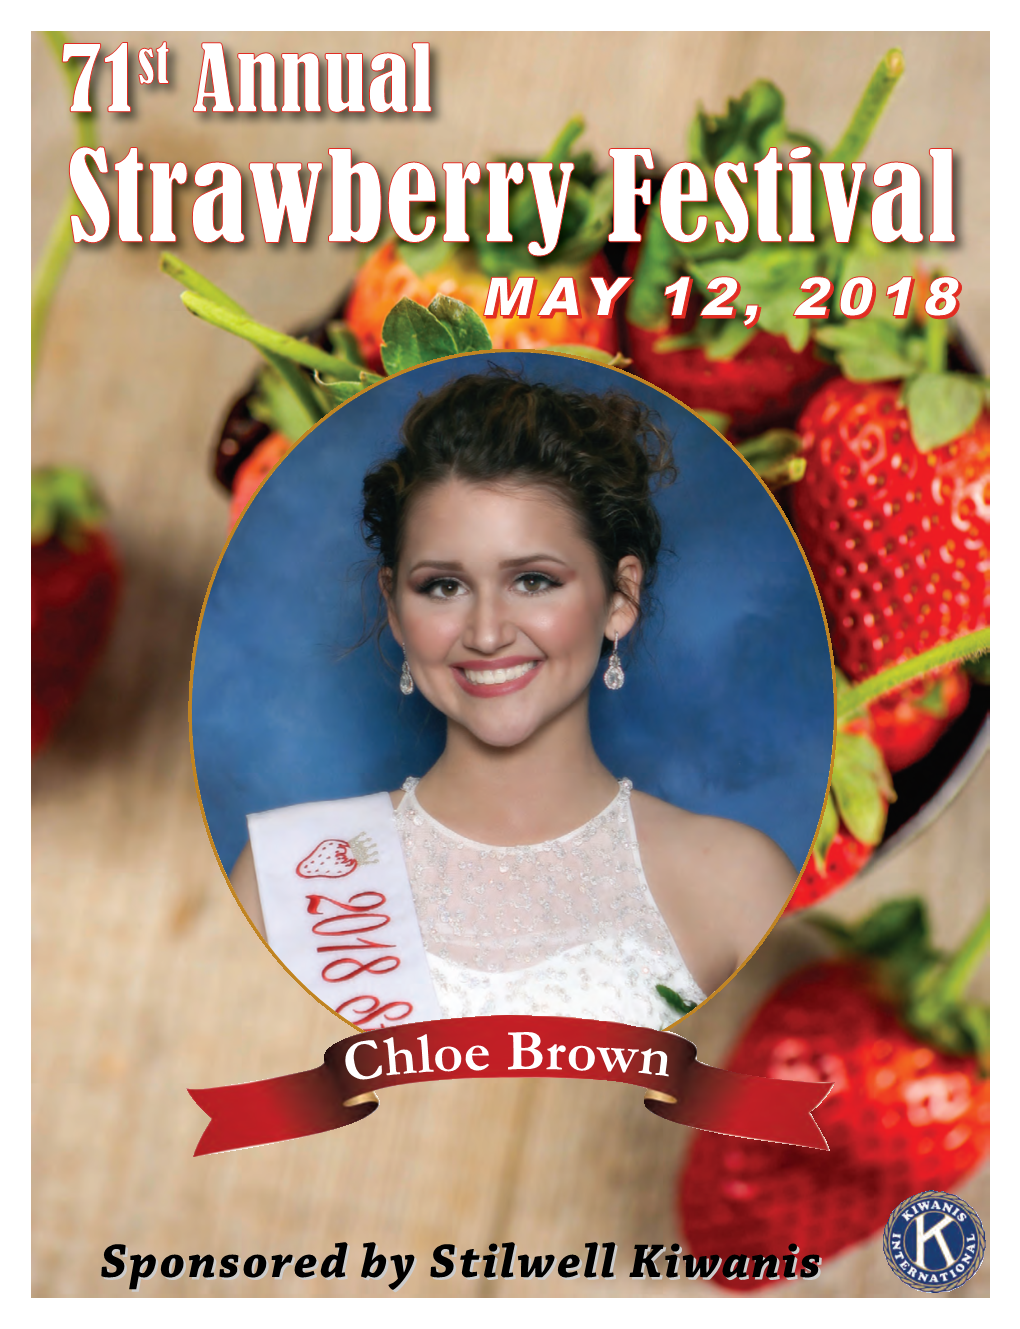 The Strawberry Festival Project Was Submitted with Over 40 Other Projects by Kiwanis Clubs Internationally As a Signature Project